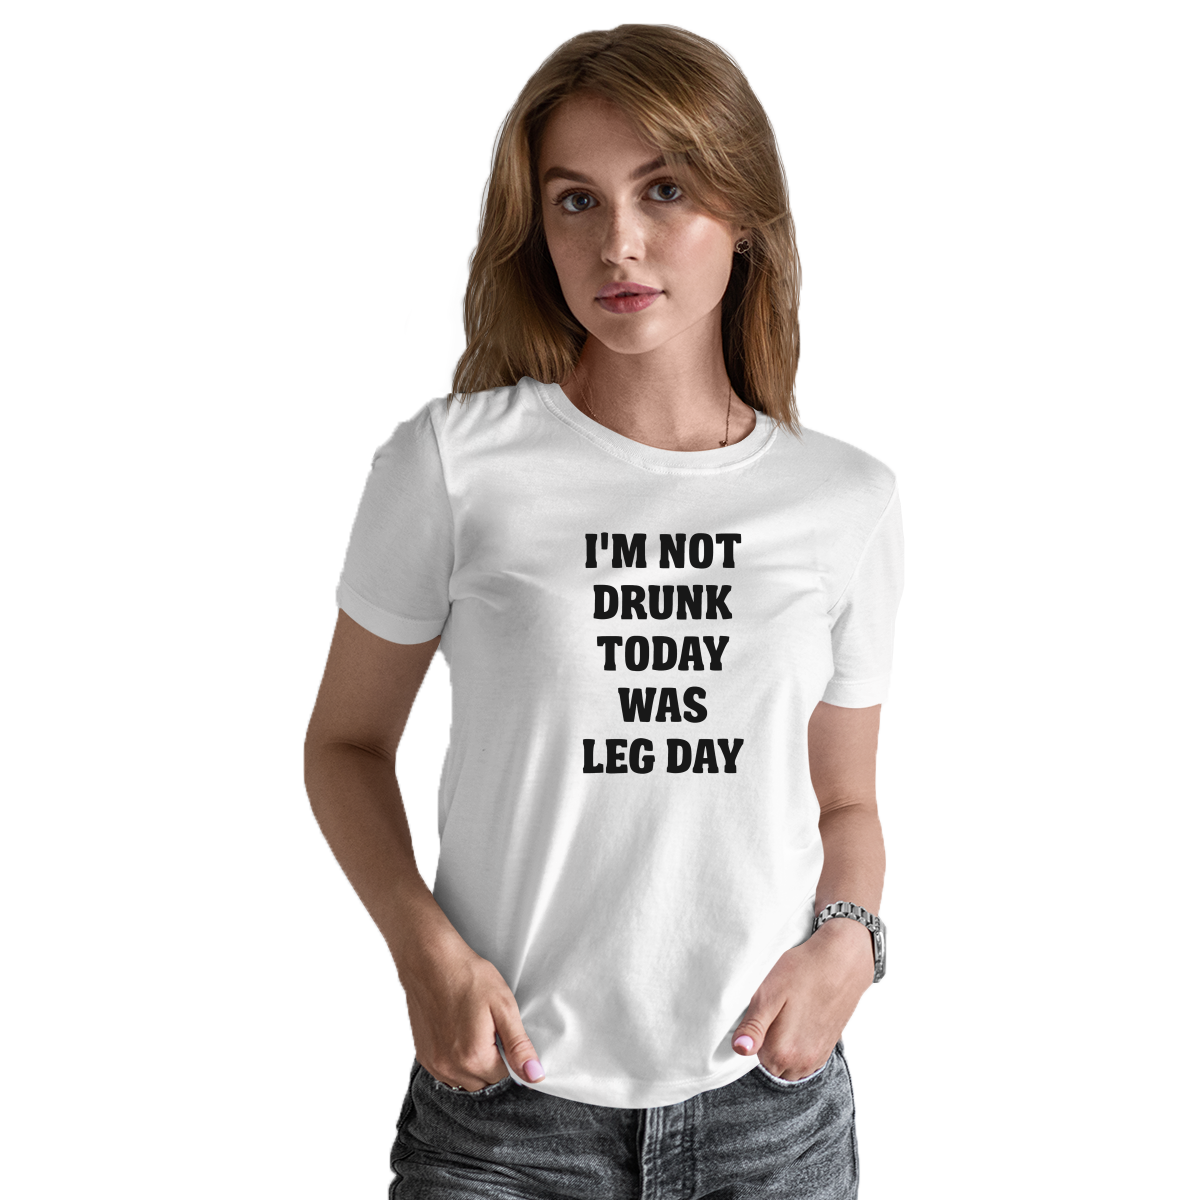 I'm Not Drunk Today Was Leg Day Women's T-shirt | White